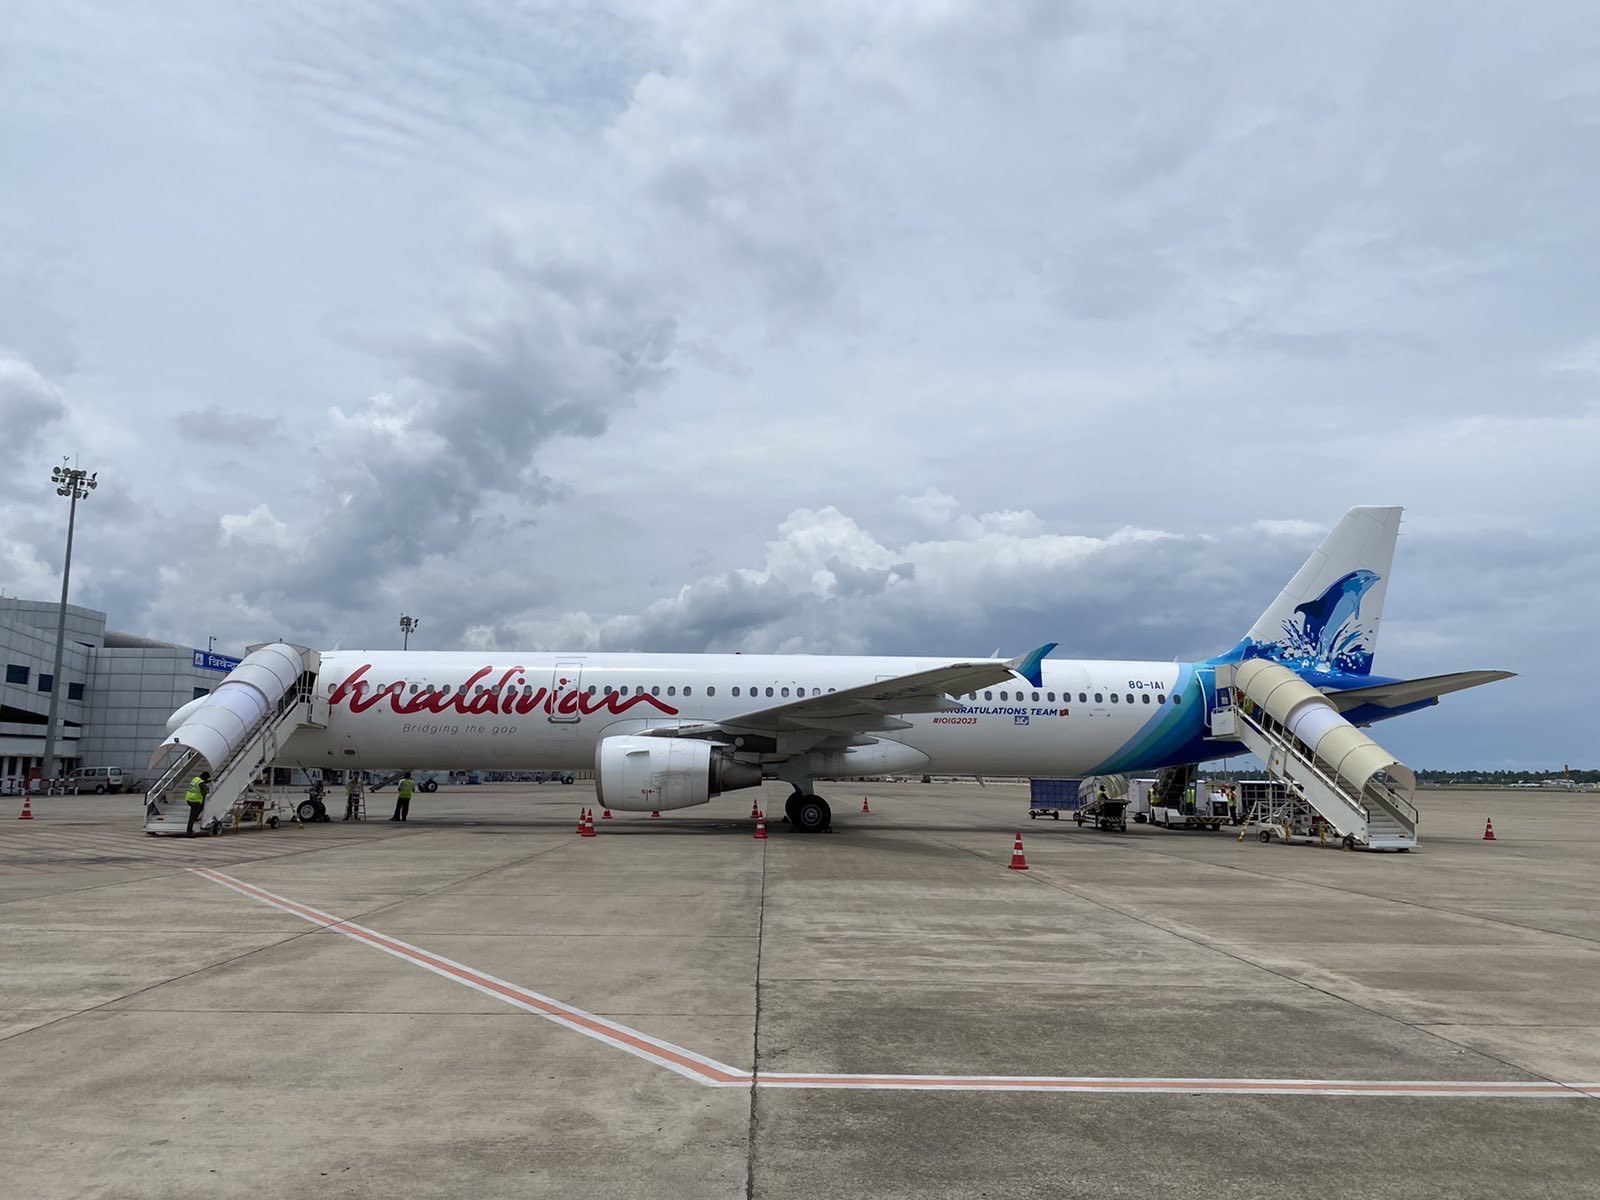 A Record-Breaking Cargo Freighter to Maldives